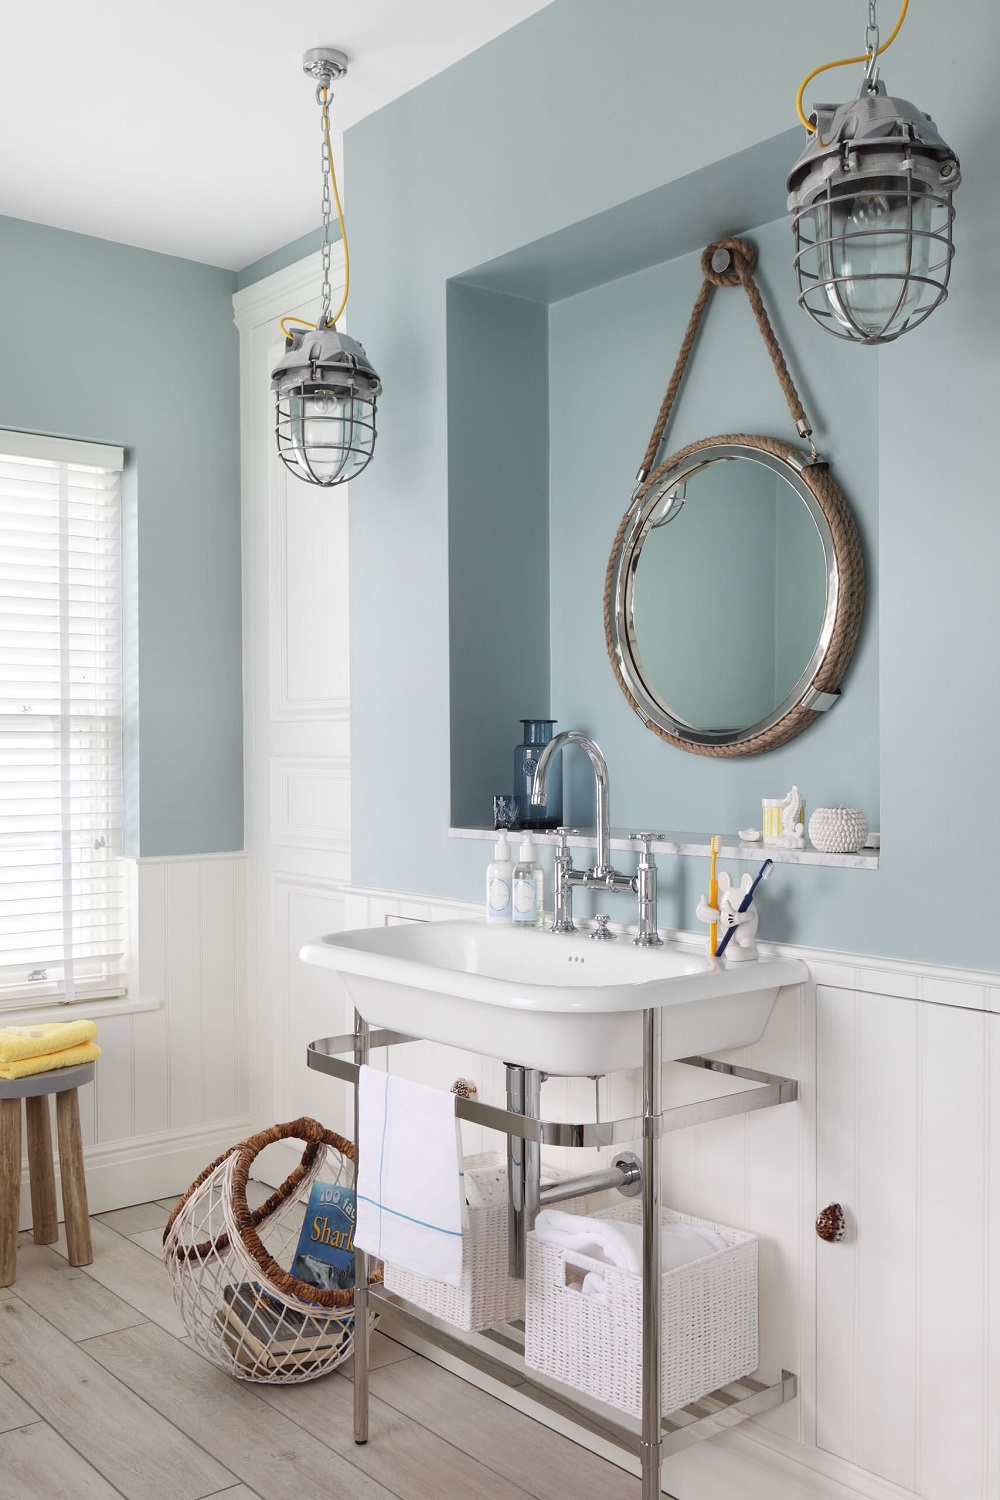 t1-78 The awesome nautical bathroom décor and pictures to inspire you